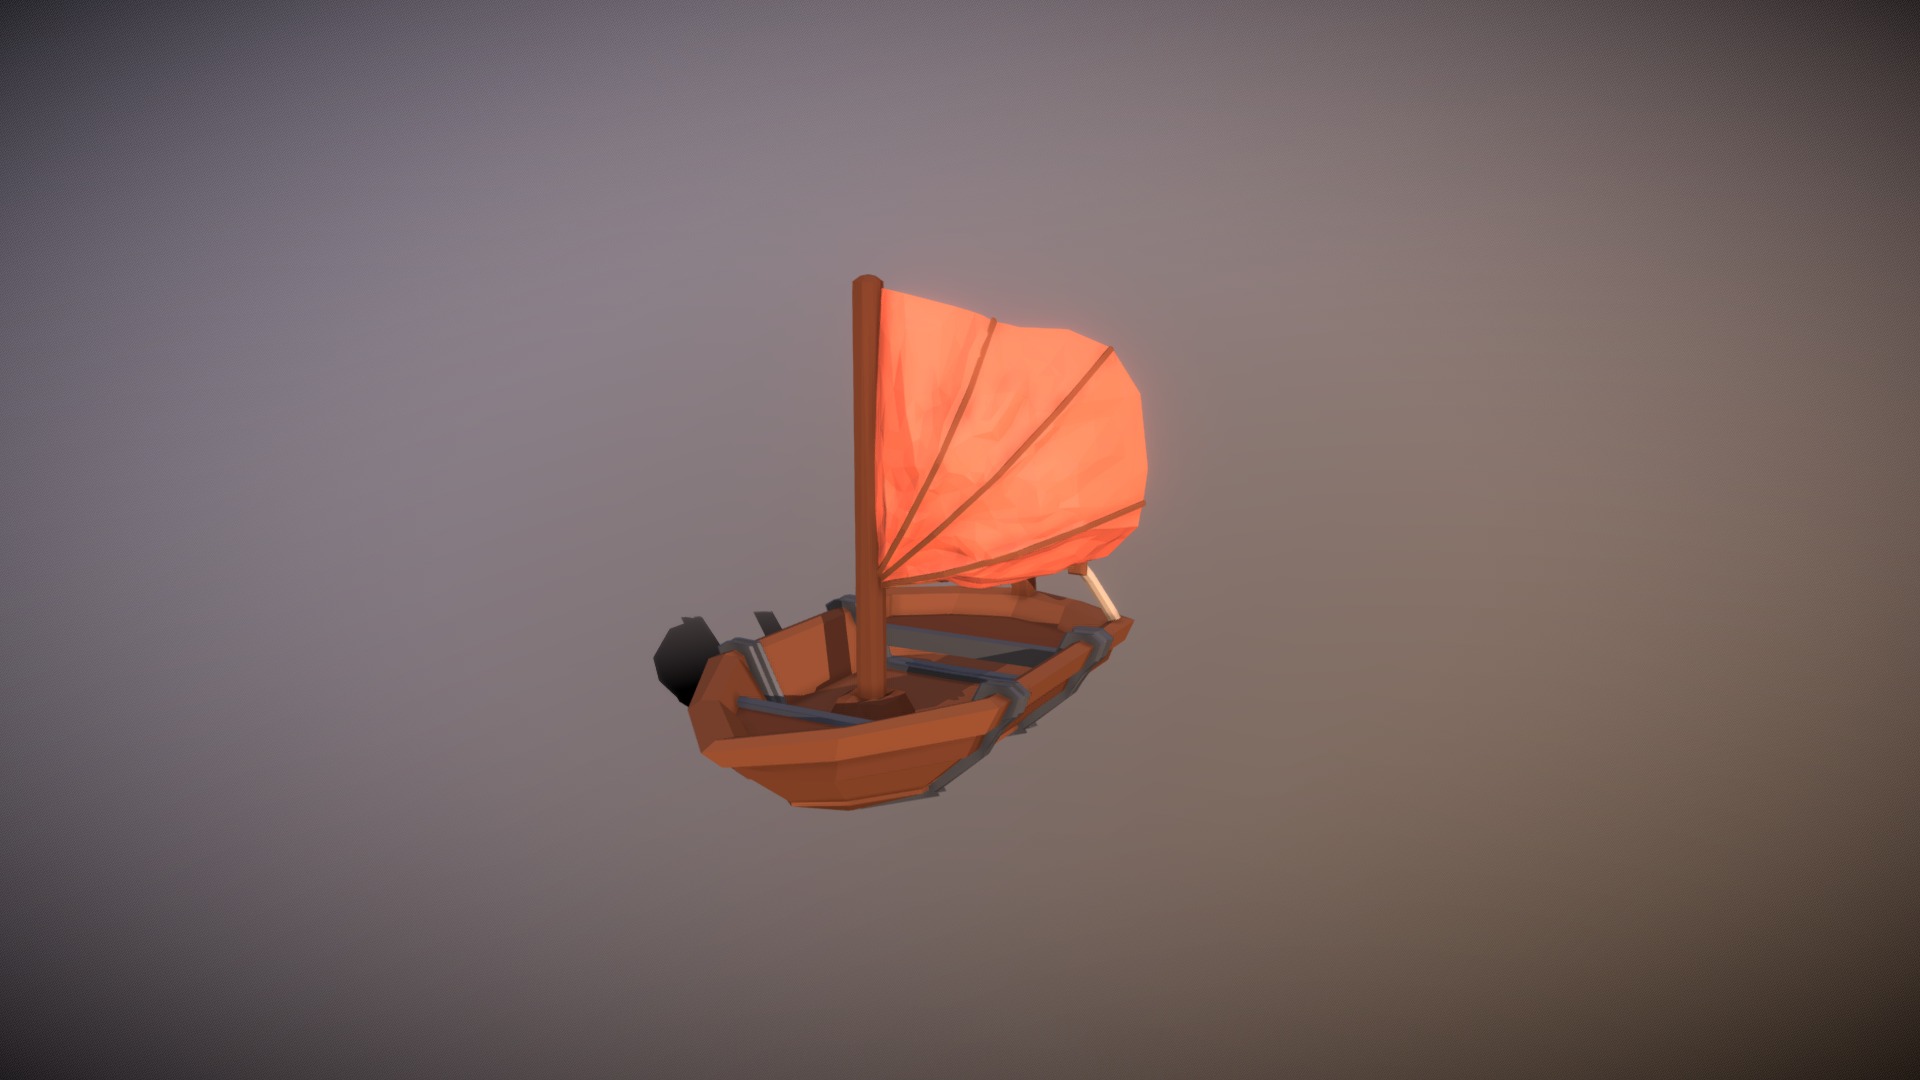 3D model Low Poly Sailing Boat - This is a 3D model of the Low Poly Sailing Boat. The 3D model is about a small orange and white boat.